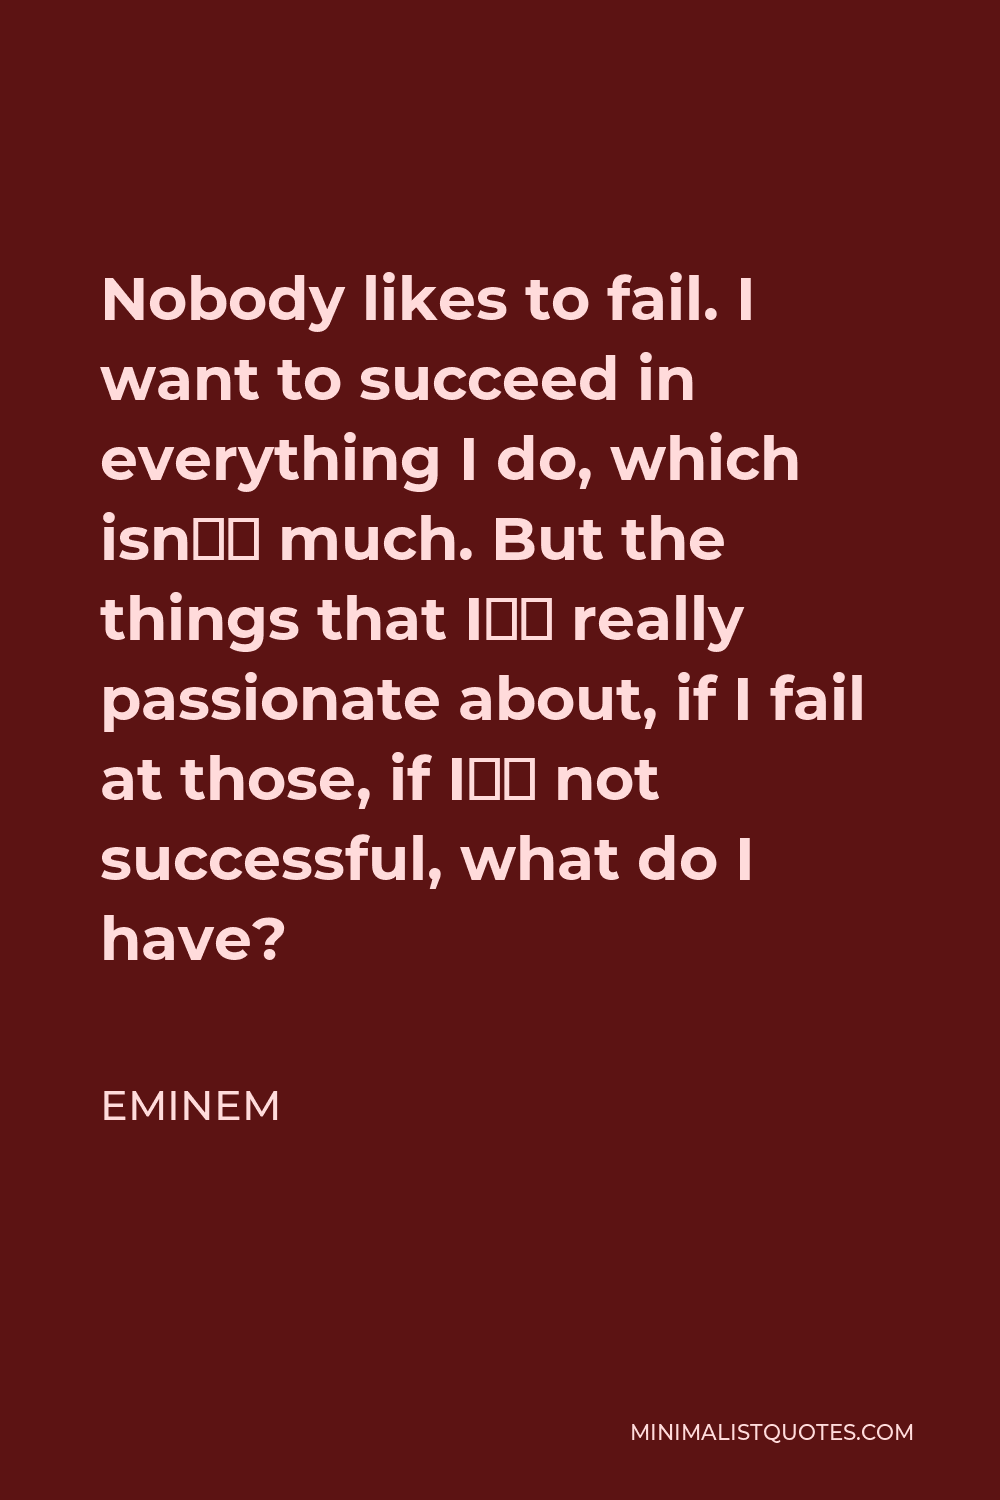 Eminem Quote - Nobody likes to fail. I want to succeed in everything I do, which isn’t much. But the things that I’m really passionate about, if I fail at those, if I’m not successful, what do I have?